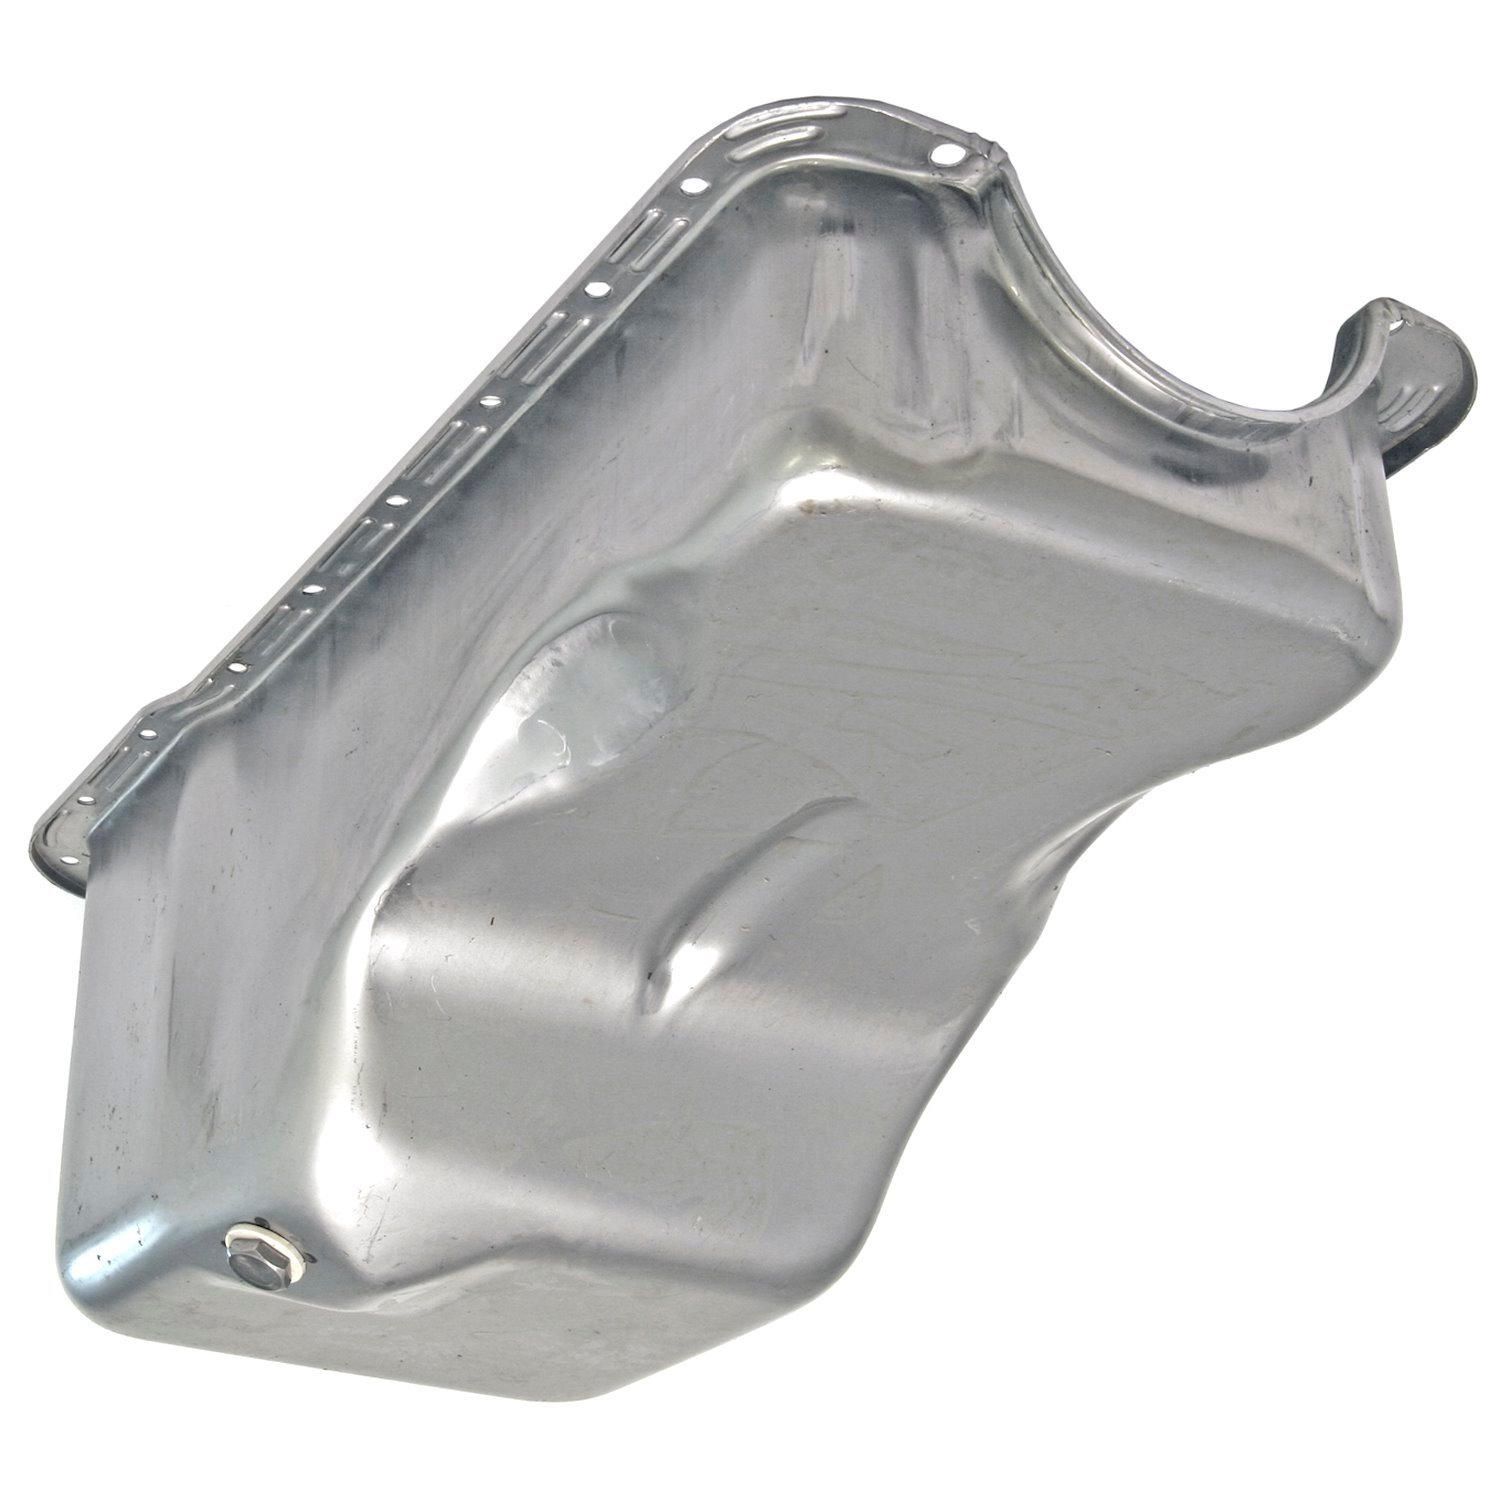 Oil Pan 1964-1970 Ford Mustang 289-302 RAW OIL